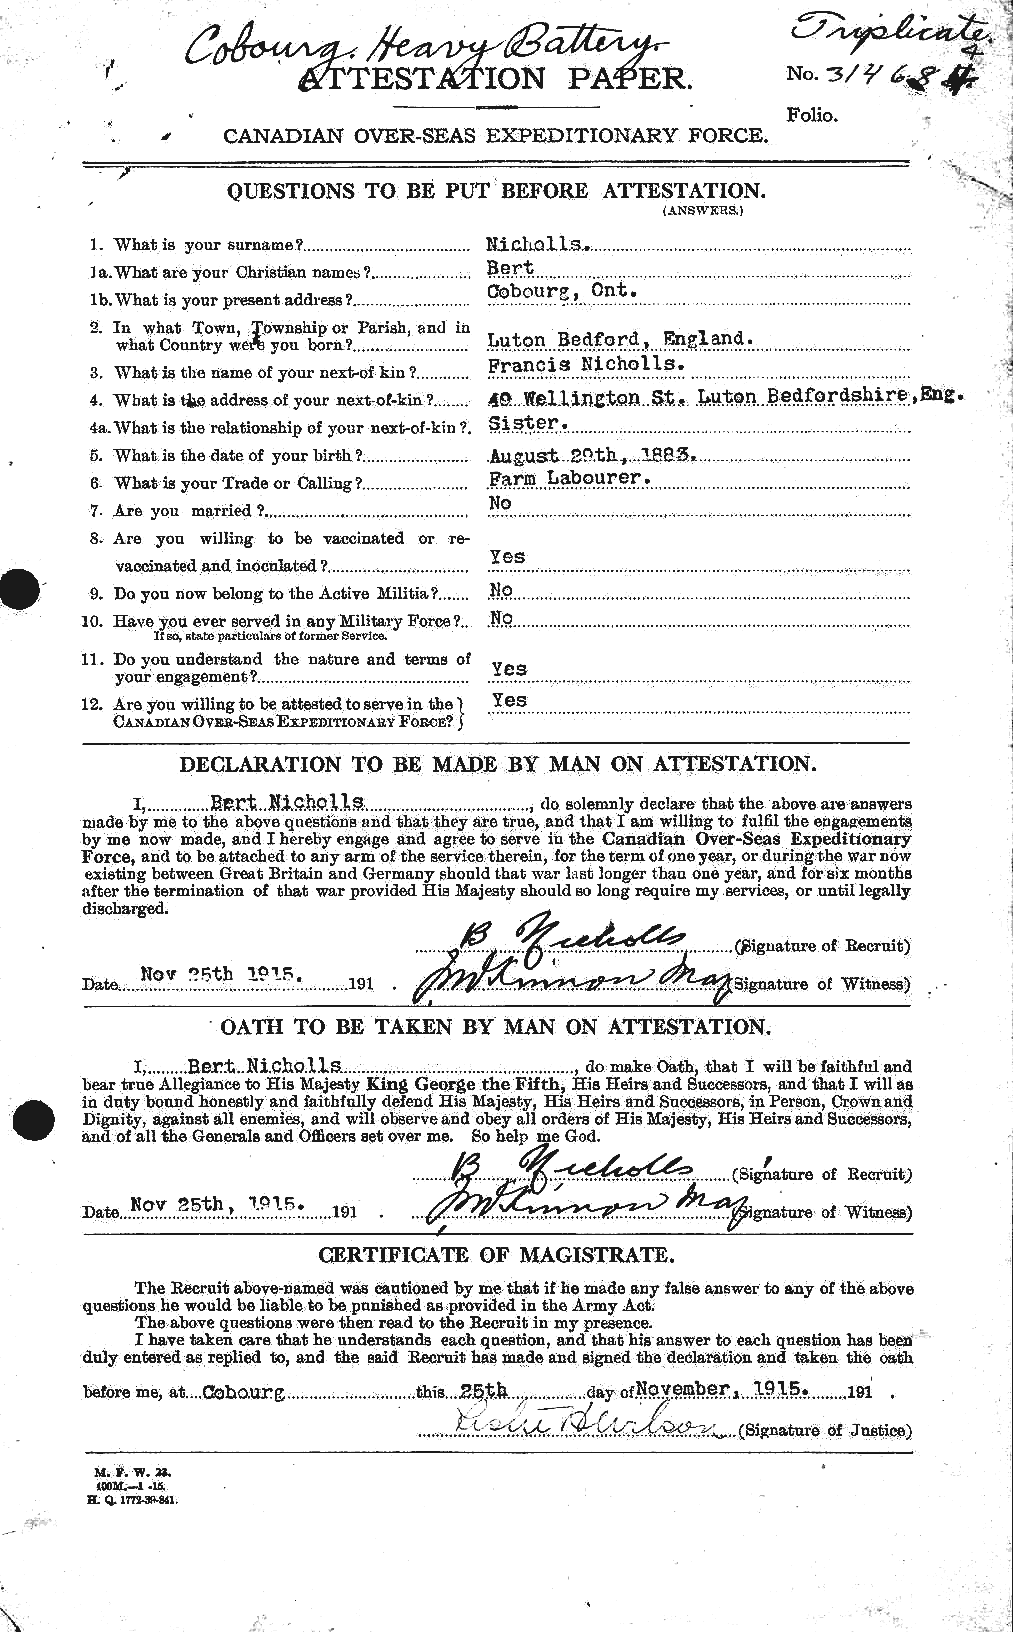 Personnel Records of the First World War - CEF 546414a